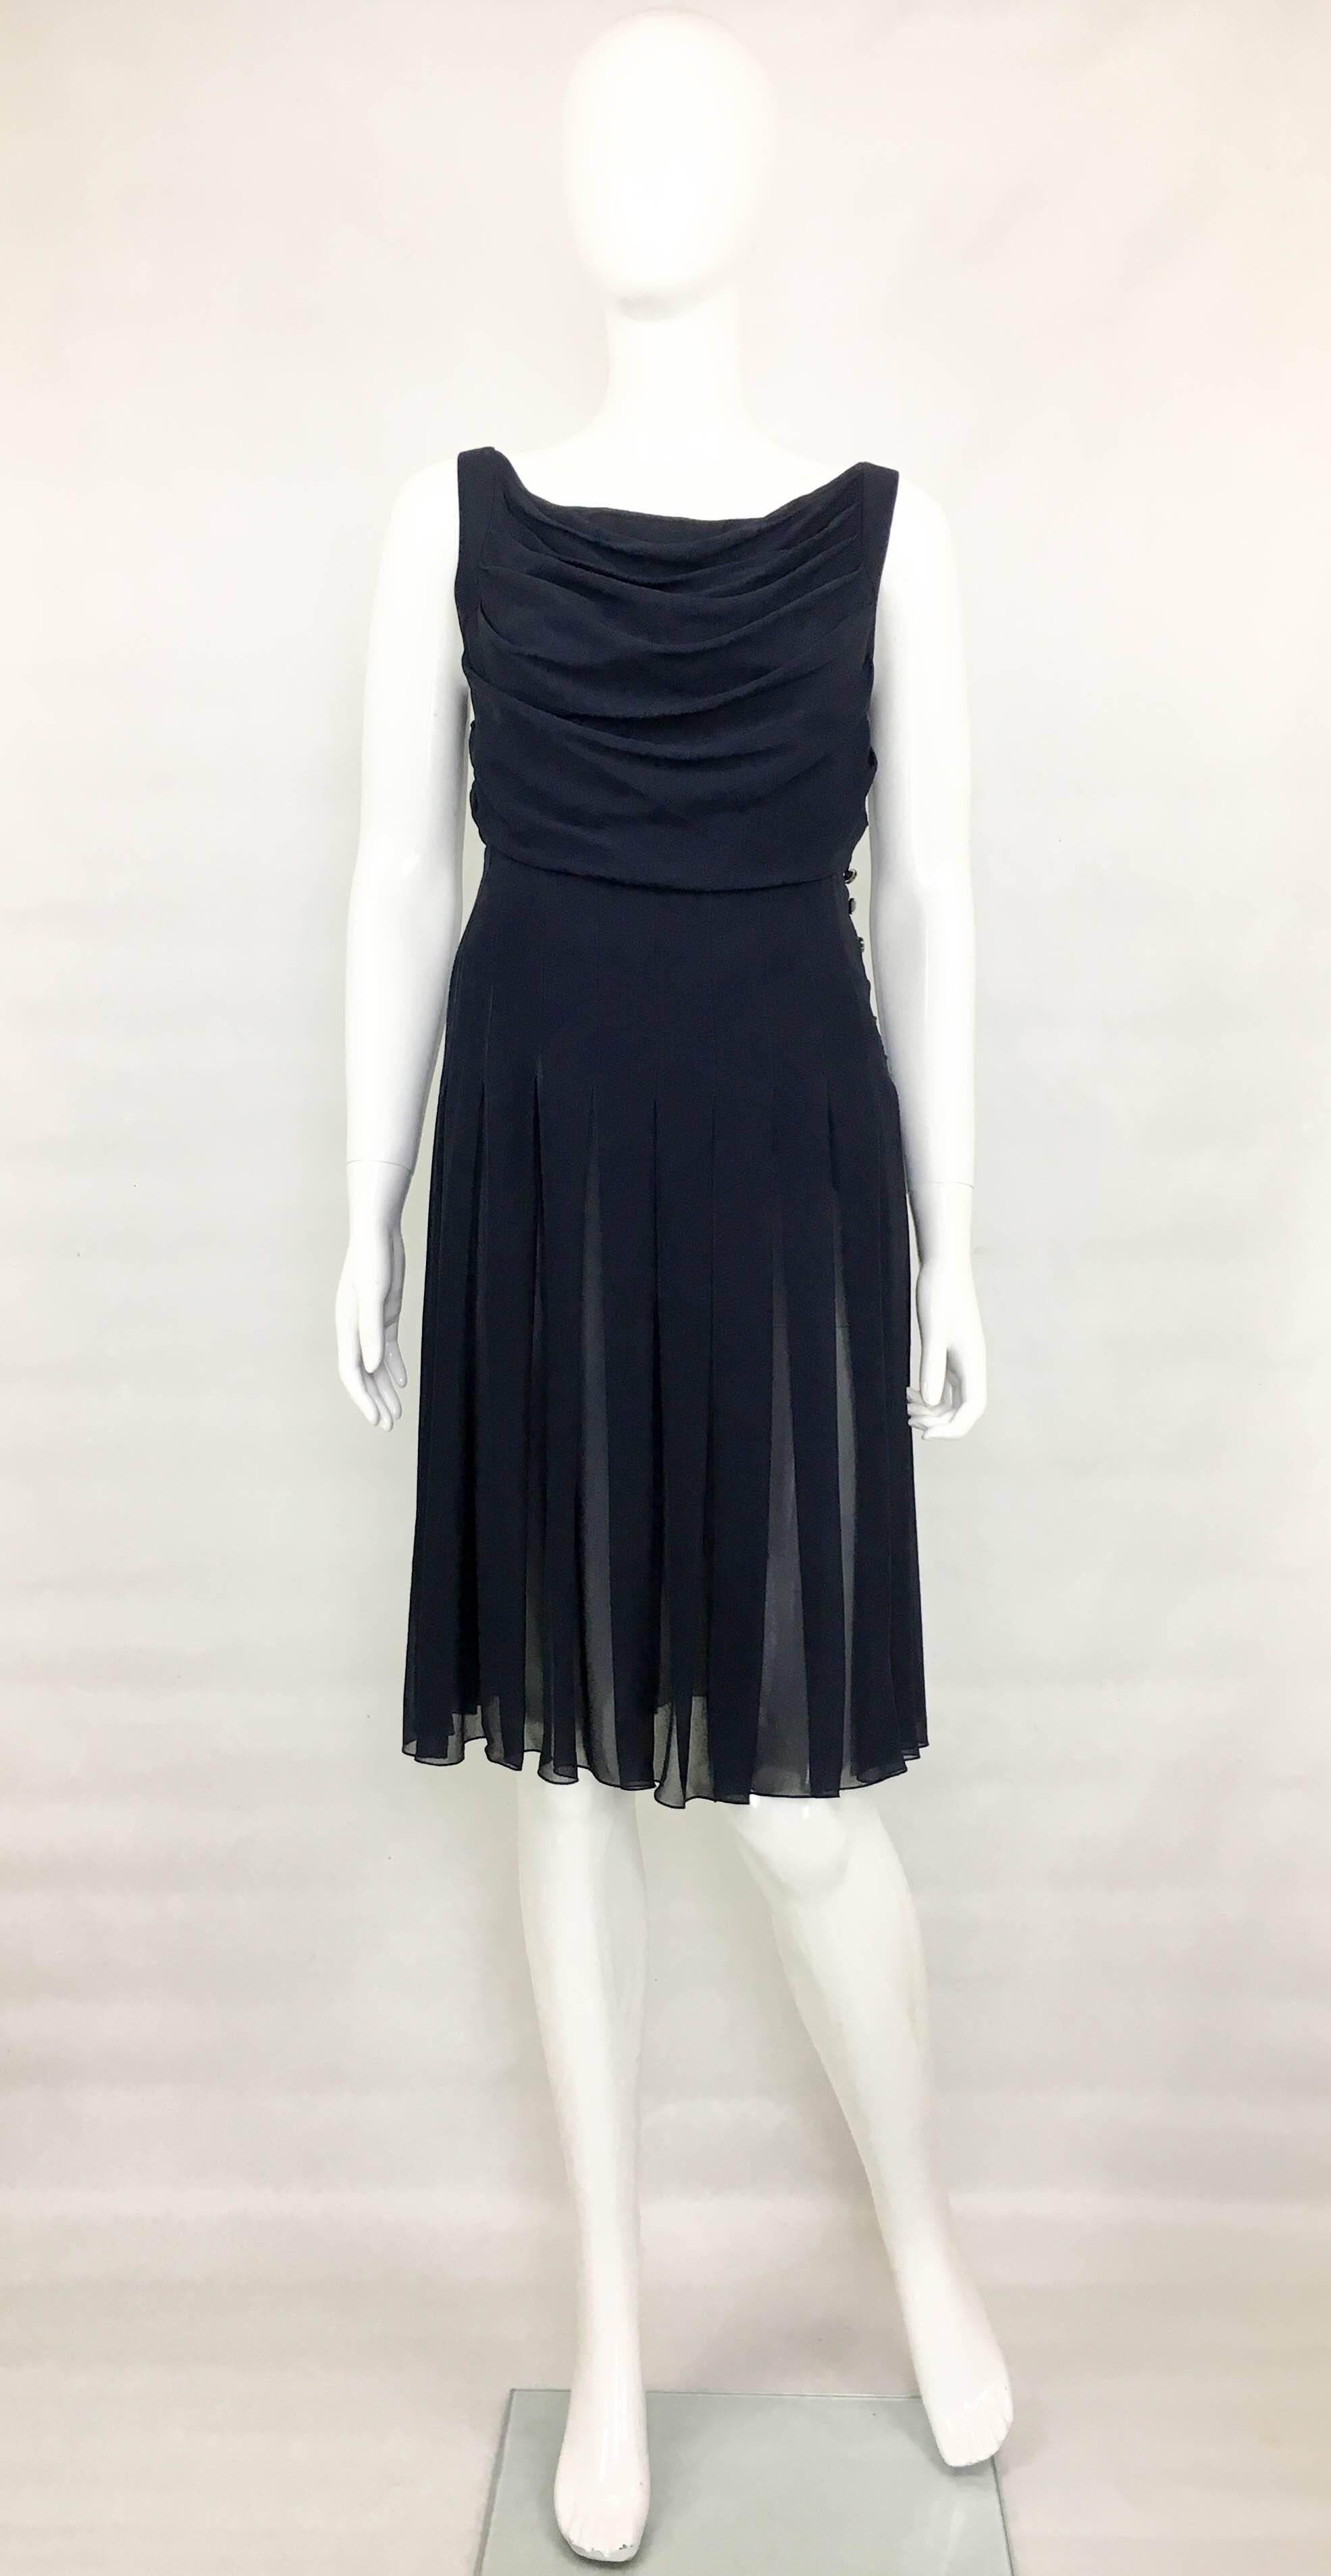 Vintage Chanel Midnight Blue Silk Chiffon Dress. This chic sleeveless dress by Chanel is part of the 2000 Spring / Summer Collection. In midnight blue silk chiffon, it has a draped bust and pleats to the skirt. It is self-lined and it has an